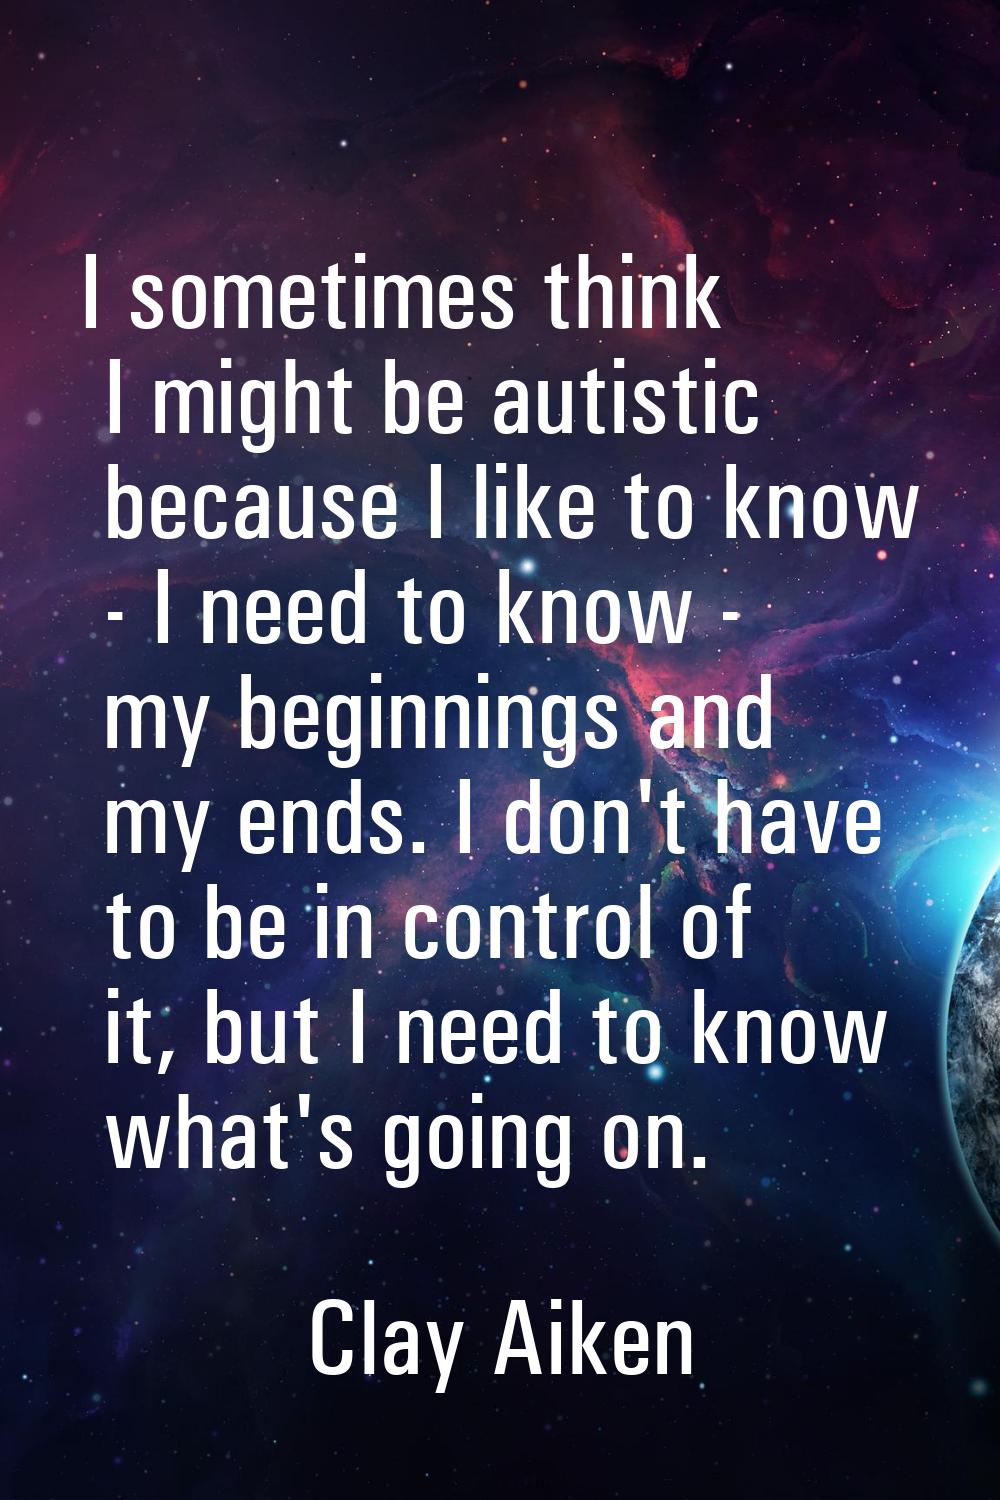 I sometimes think I might be autistic because I like to know - I need to know - my beginnings and m